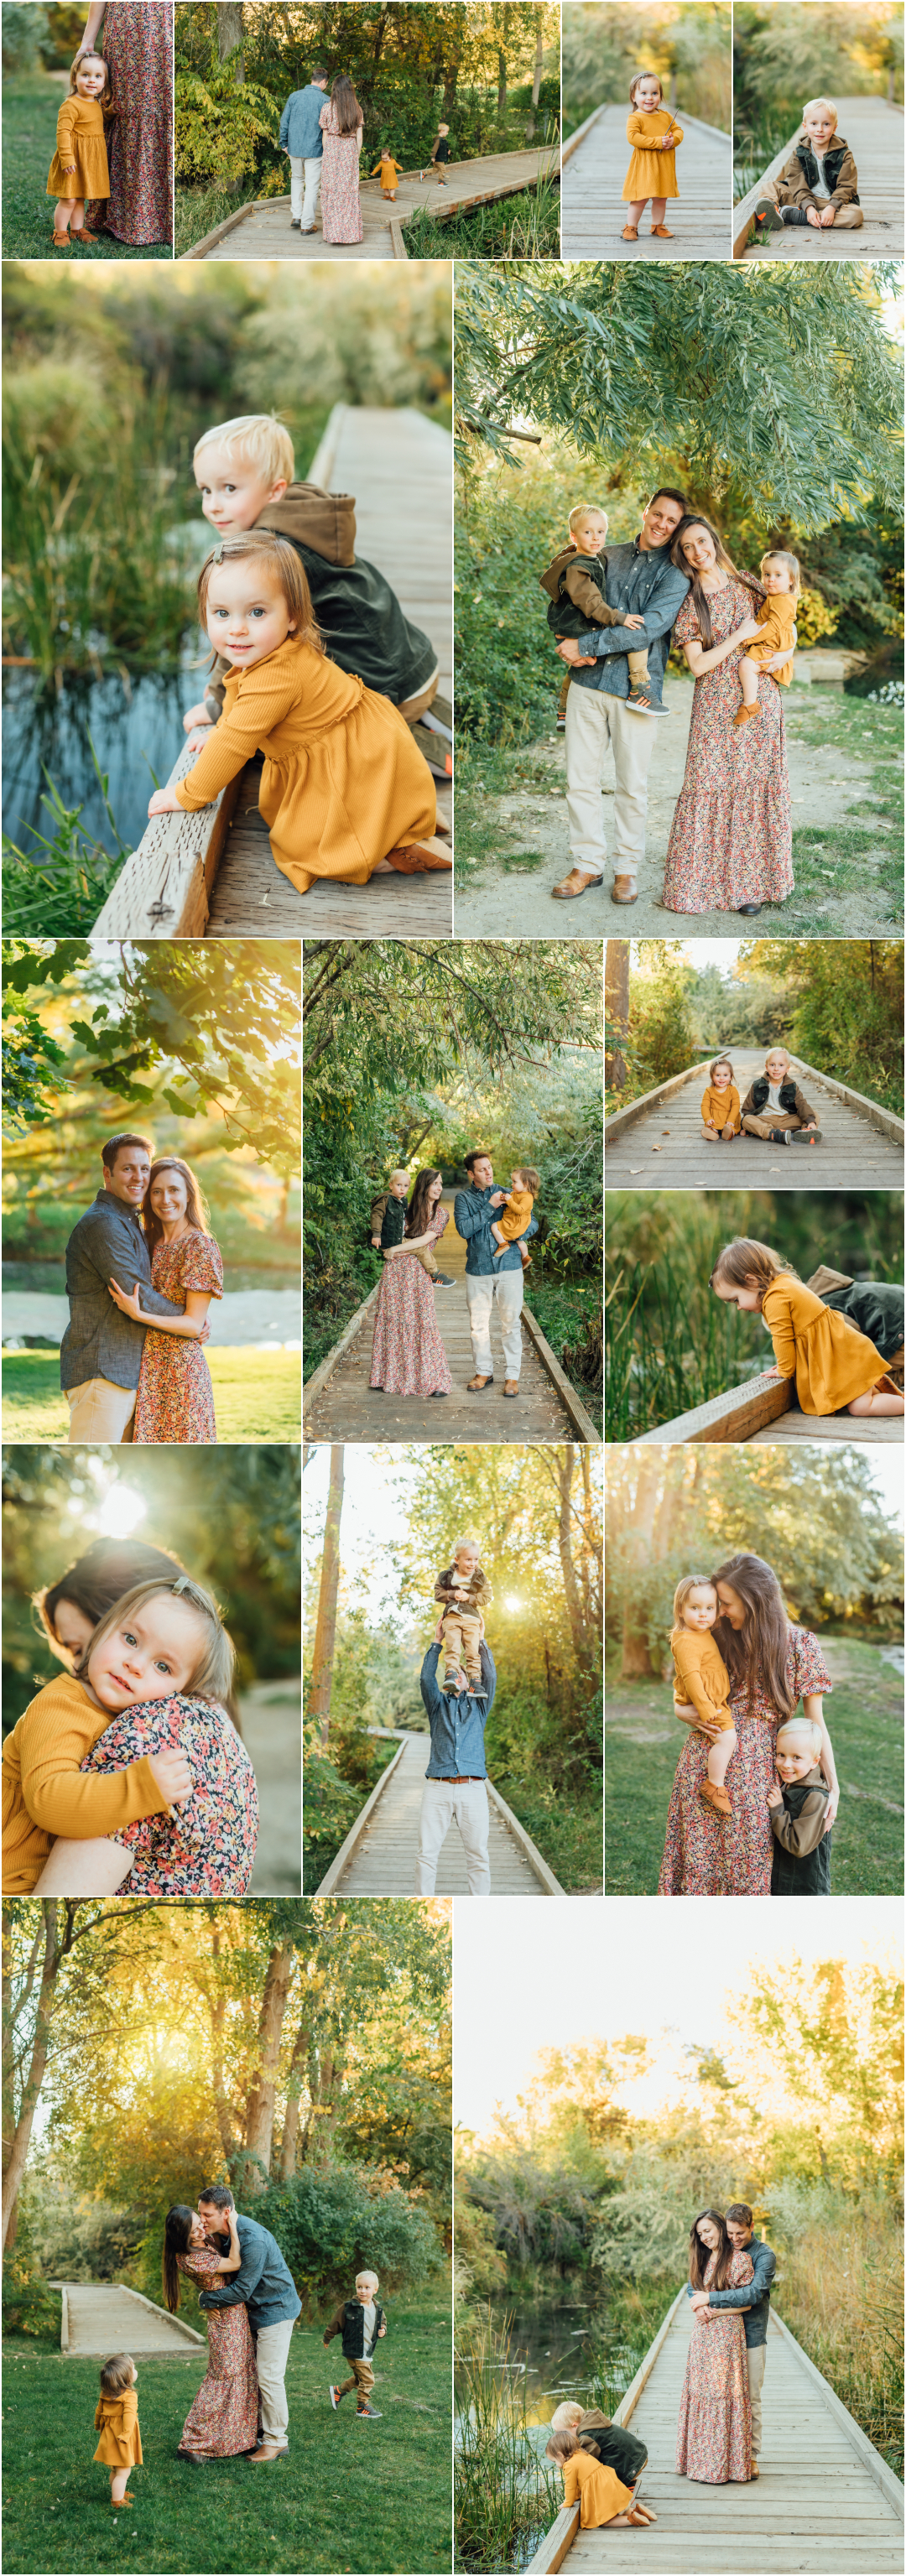 Provo Summer Photography - Family of Four